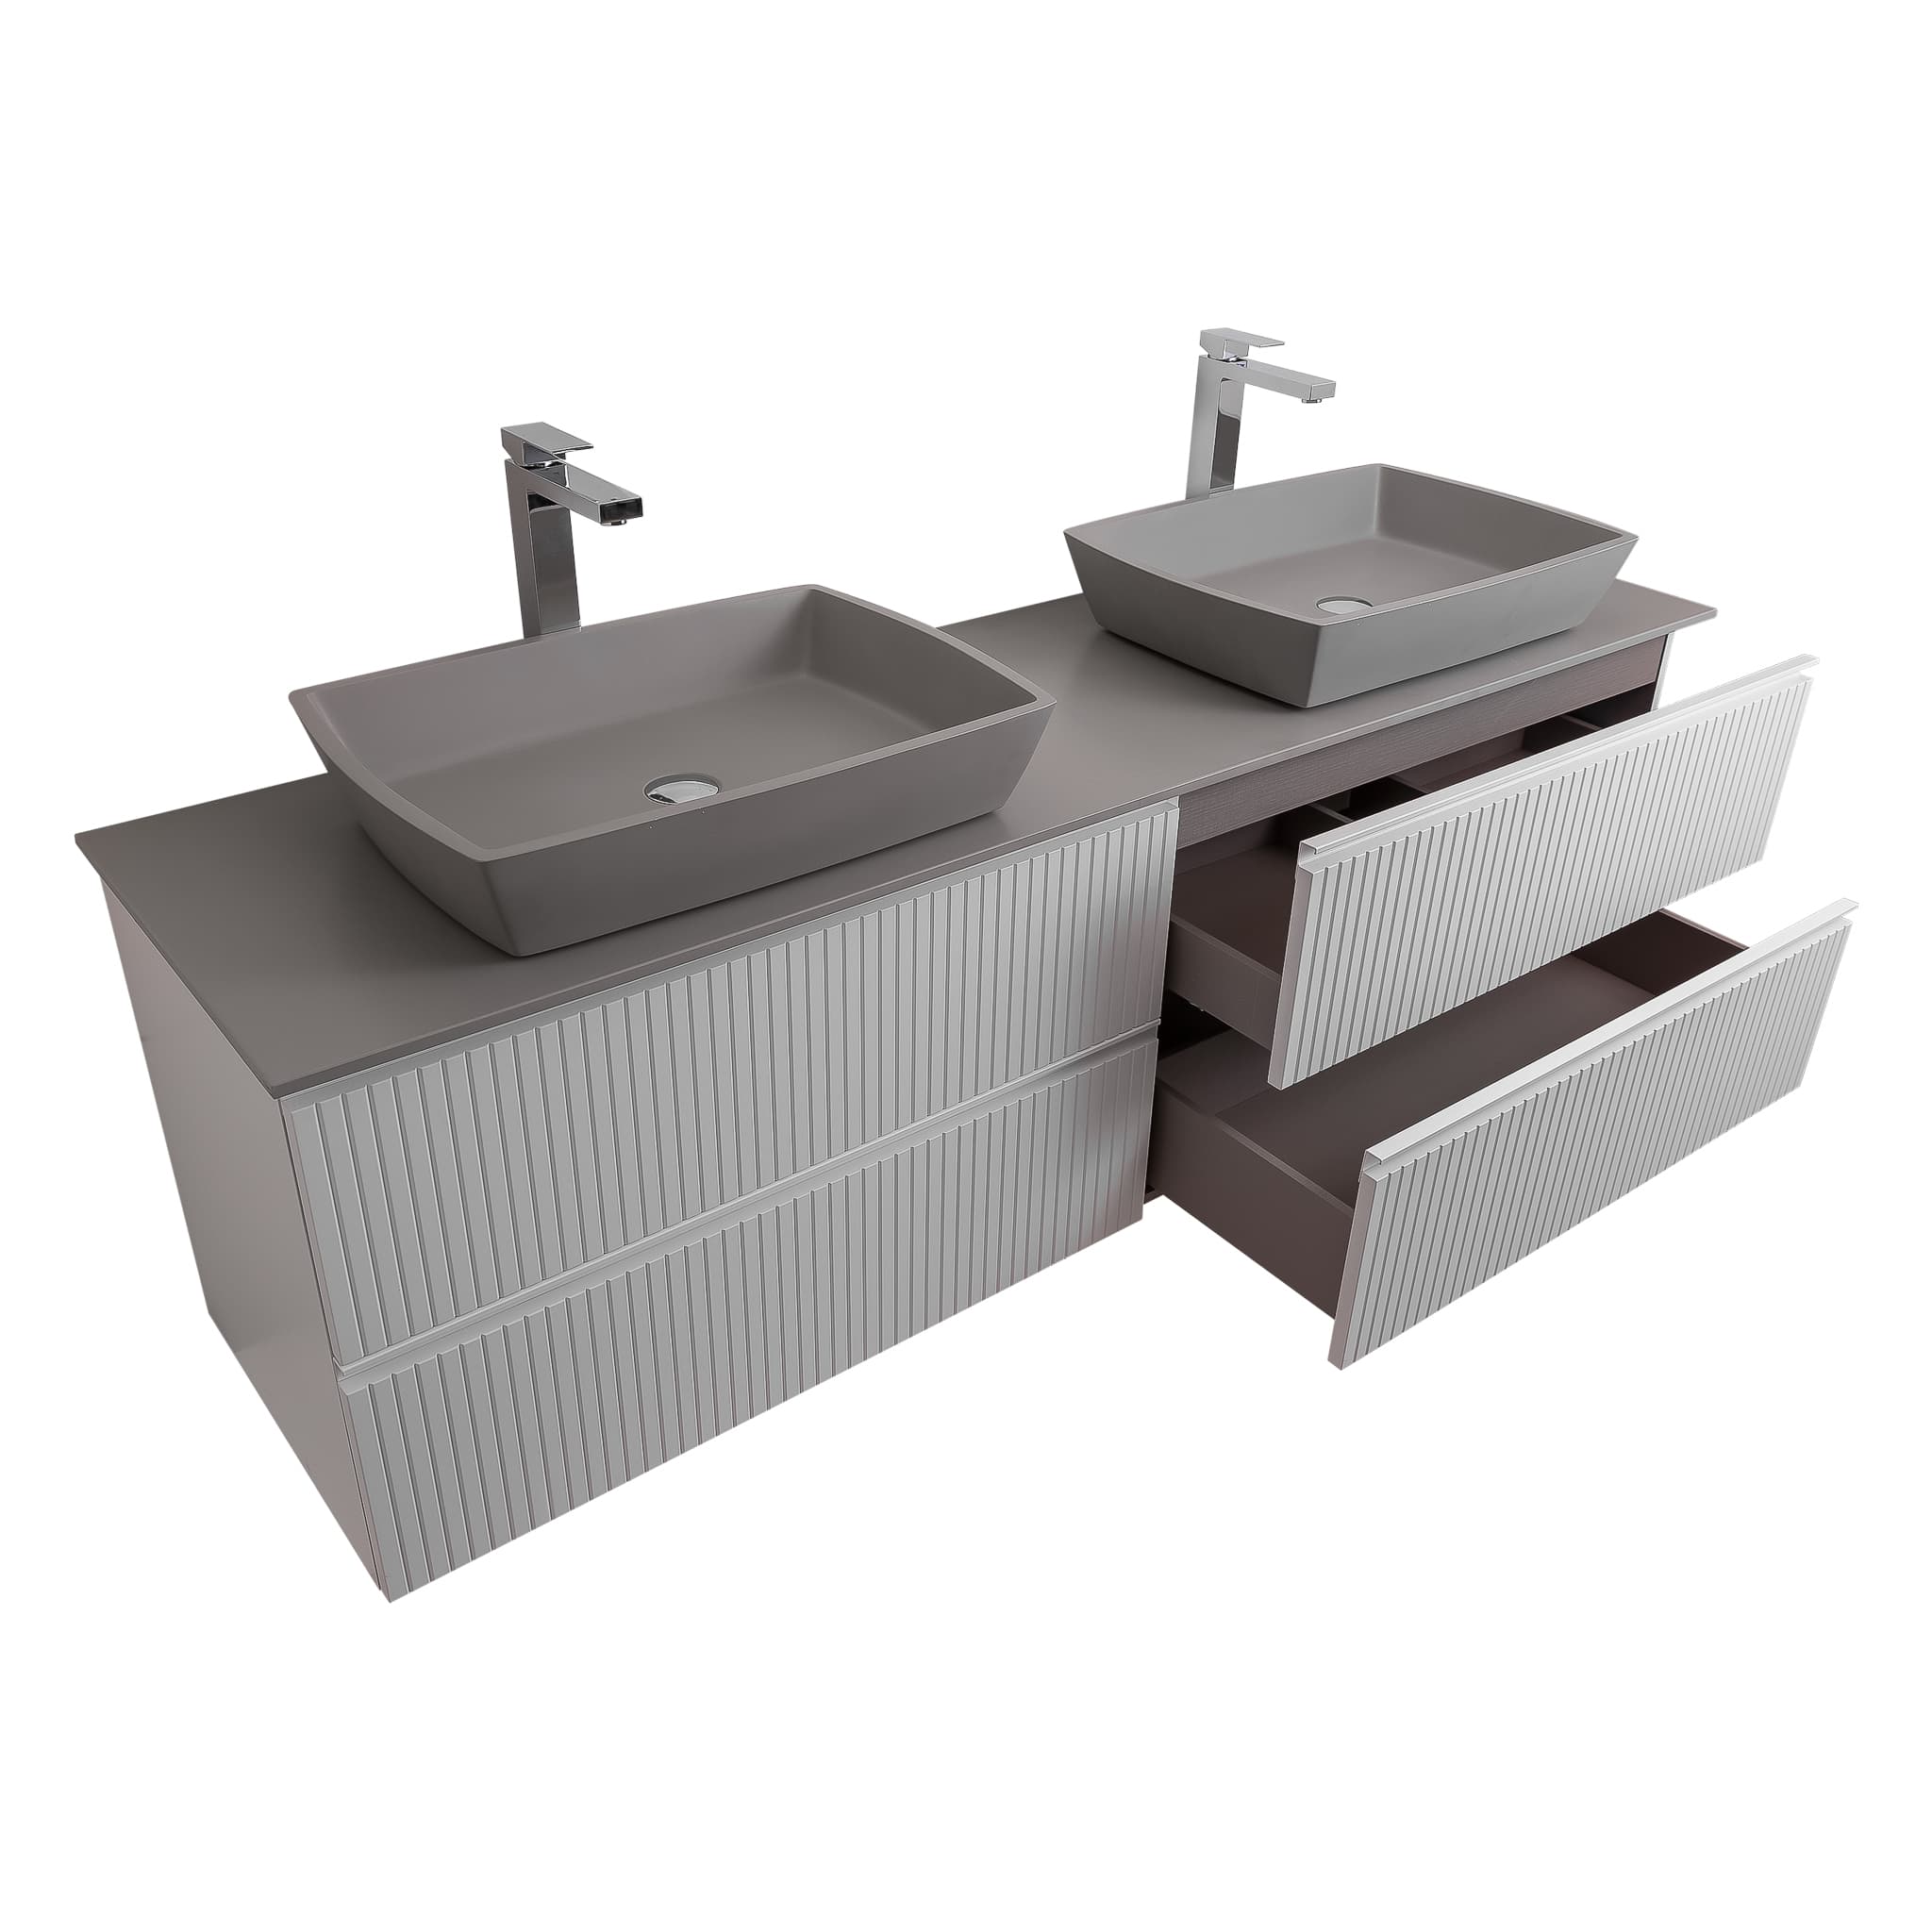 Ares 63 White Matte Cabinet, Solid Surface Flat Grey Counter And Two Square Solid Surface Grey Basin 1316, Wall Mounted Modern Vanity Set